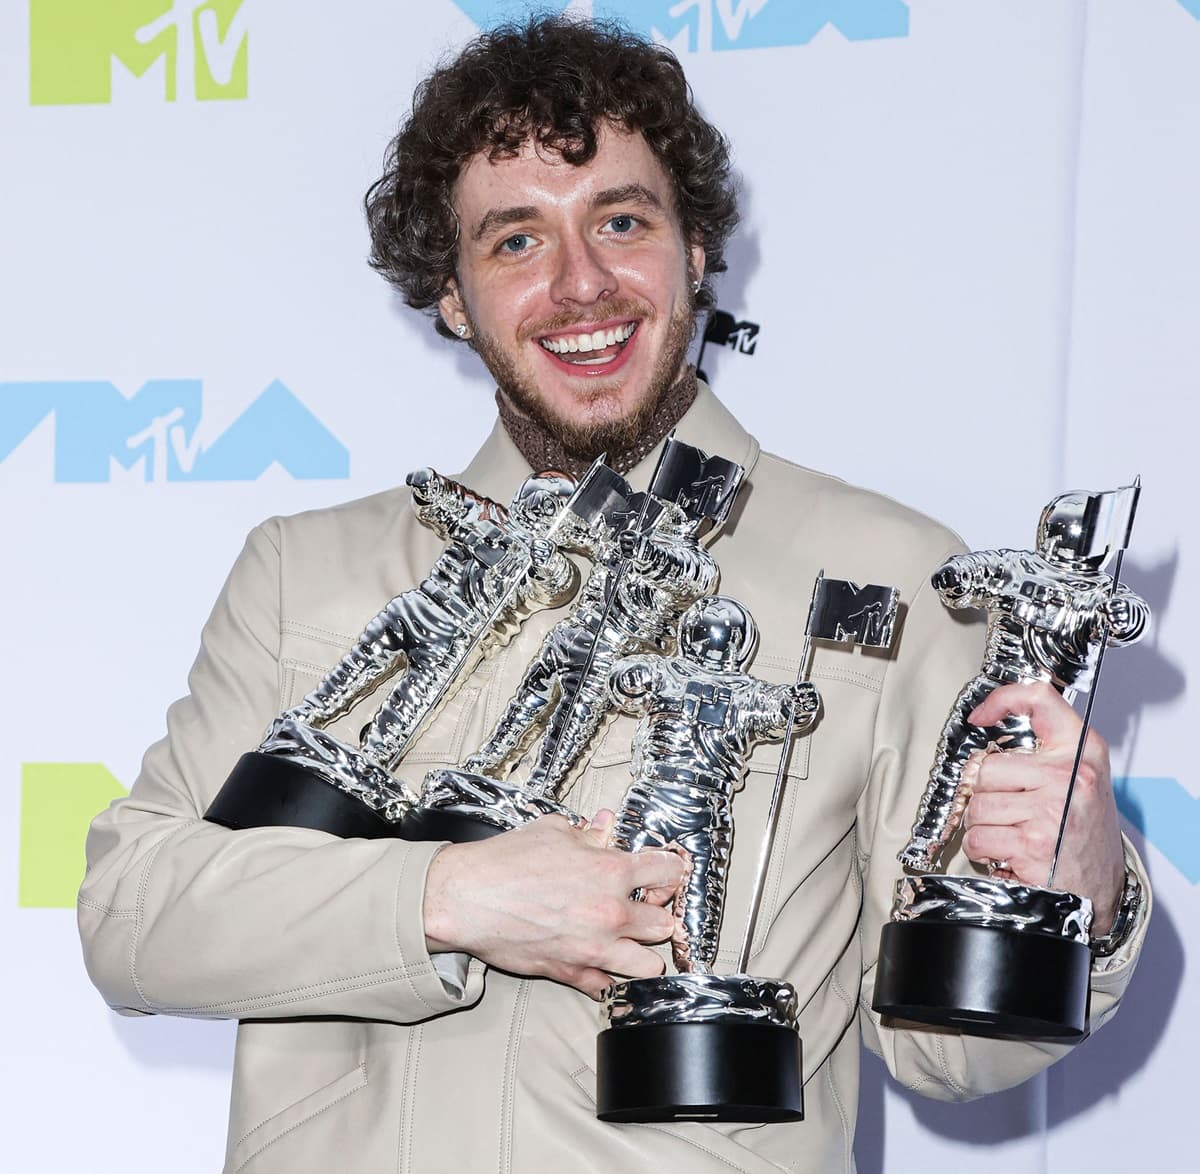 Jack Harlow, the American rapper and singer-songwriter, won four awards at the 2022 MTV VMAs